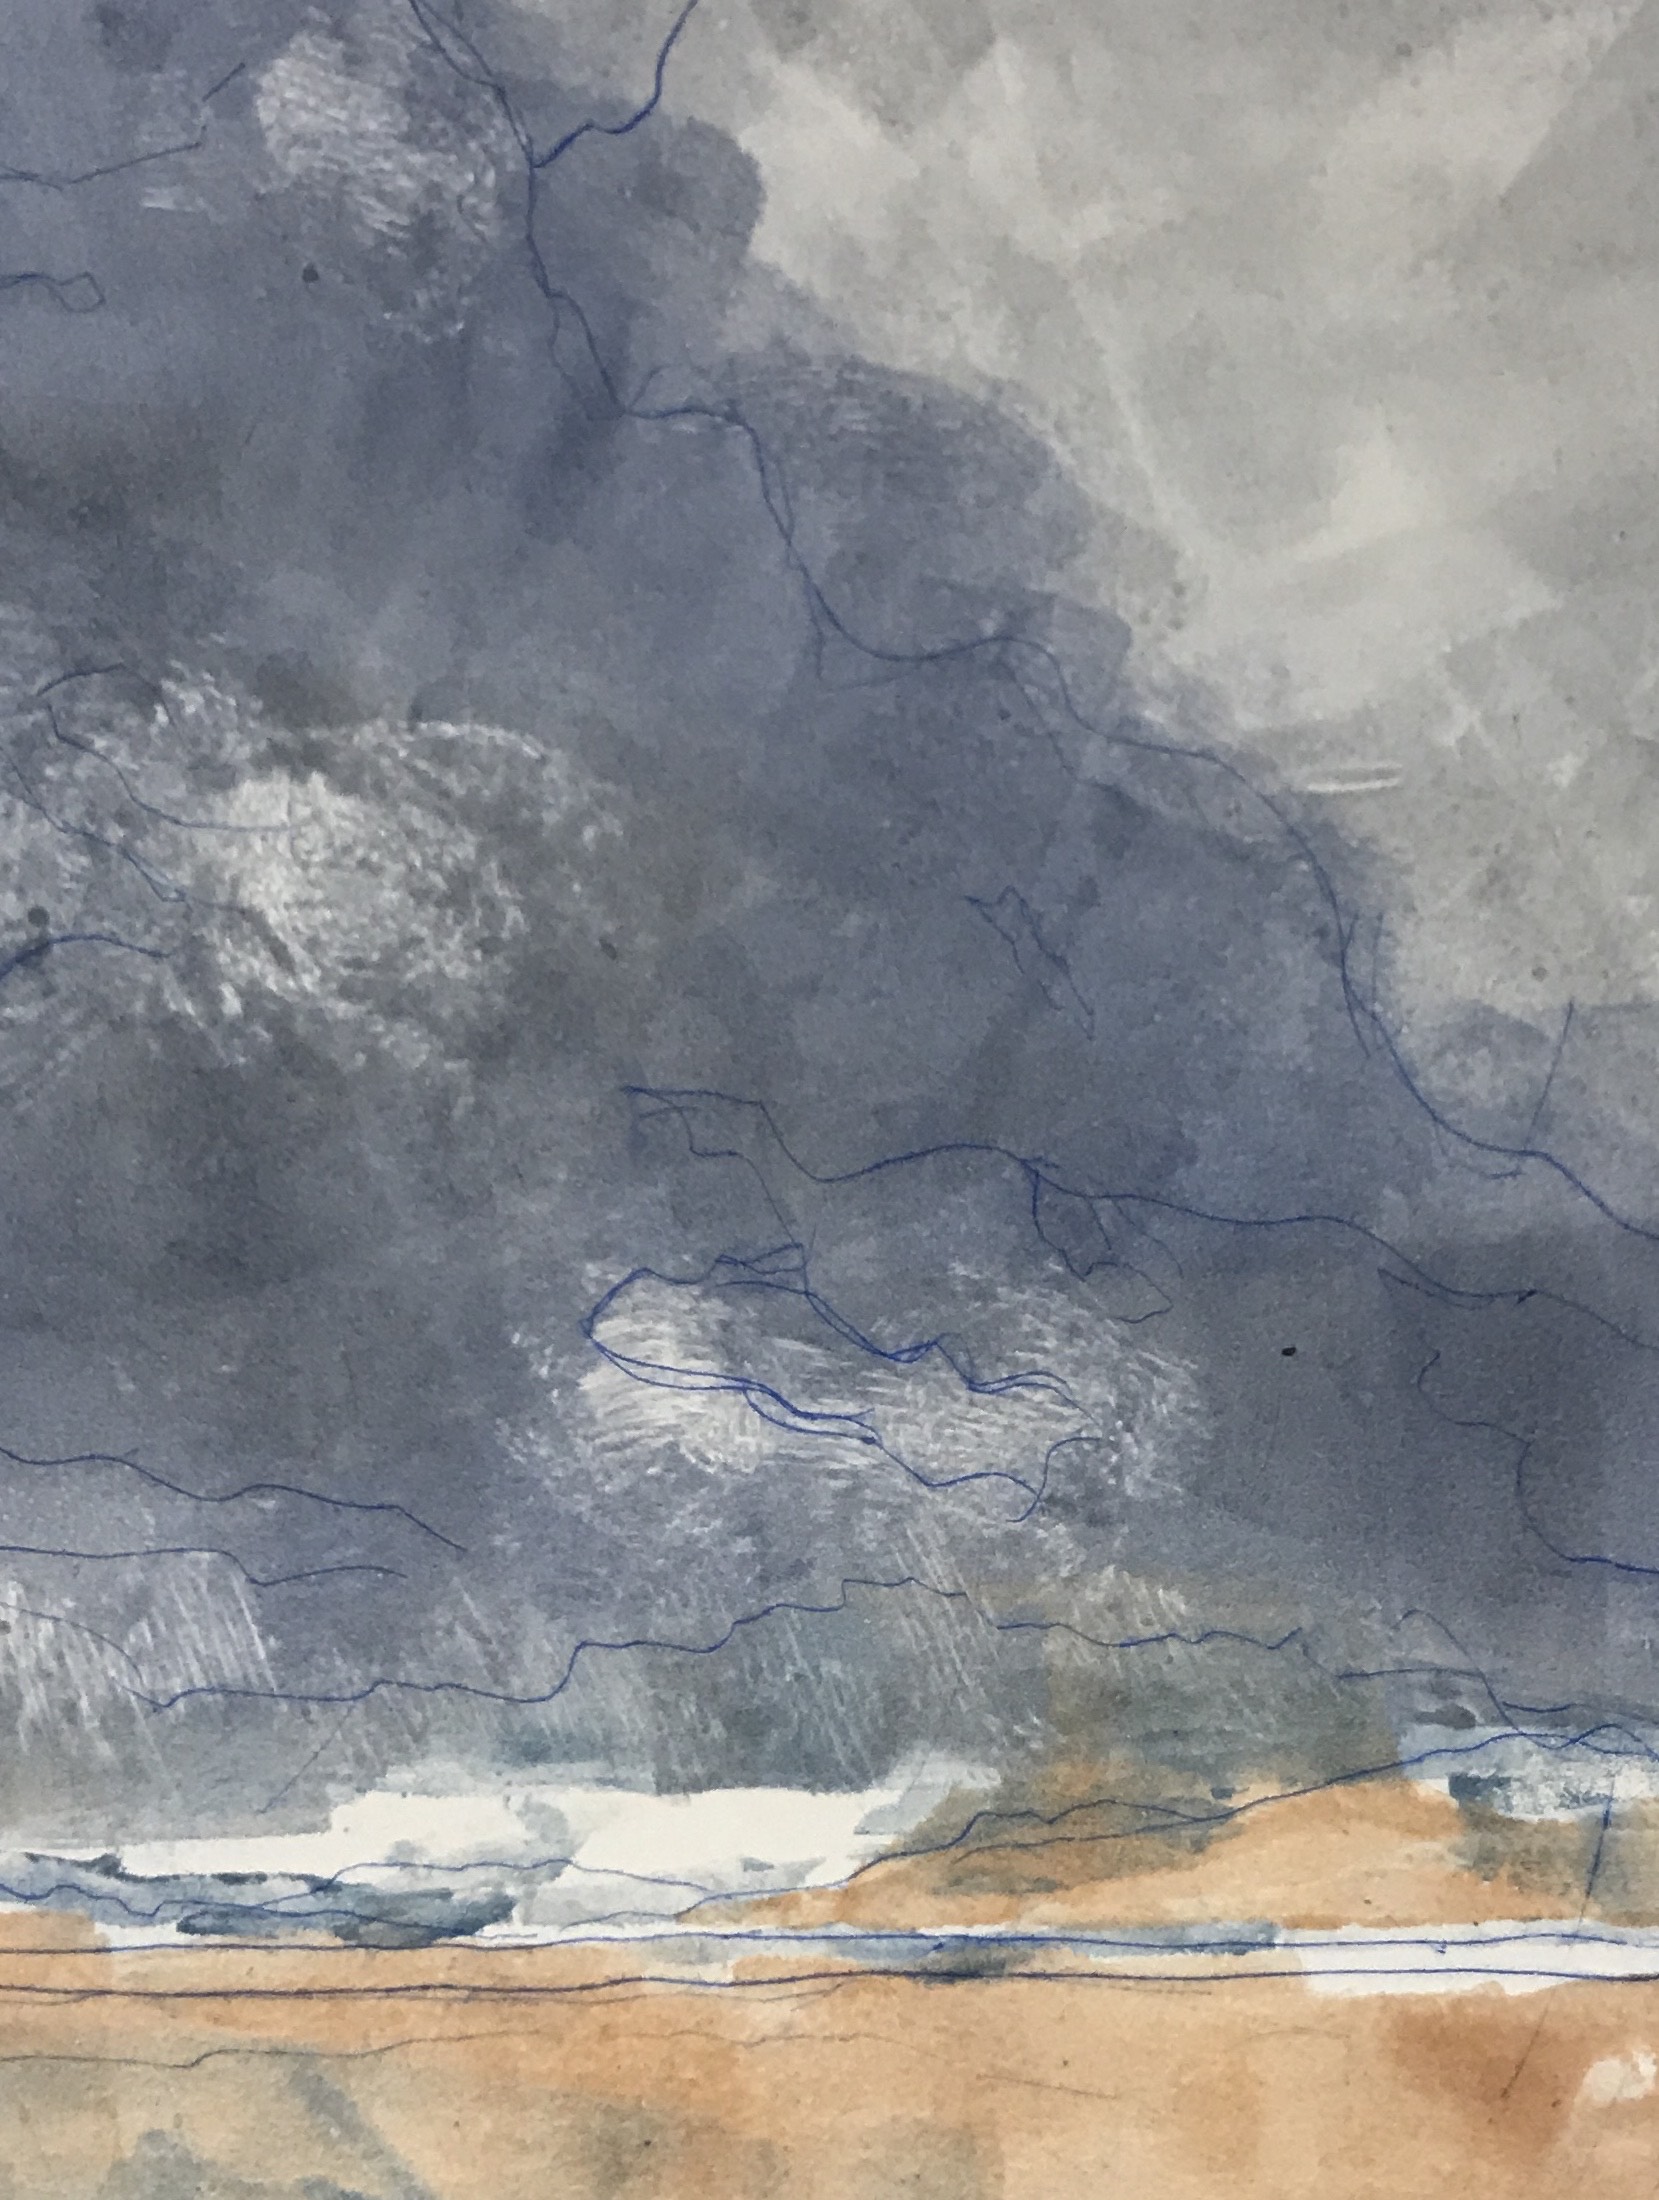 Upcoming Storm - monotype / dry point etching by Olwen Dowling